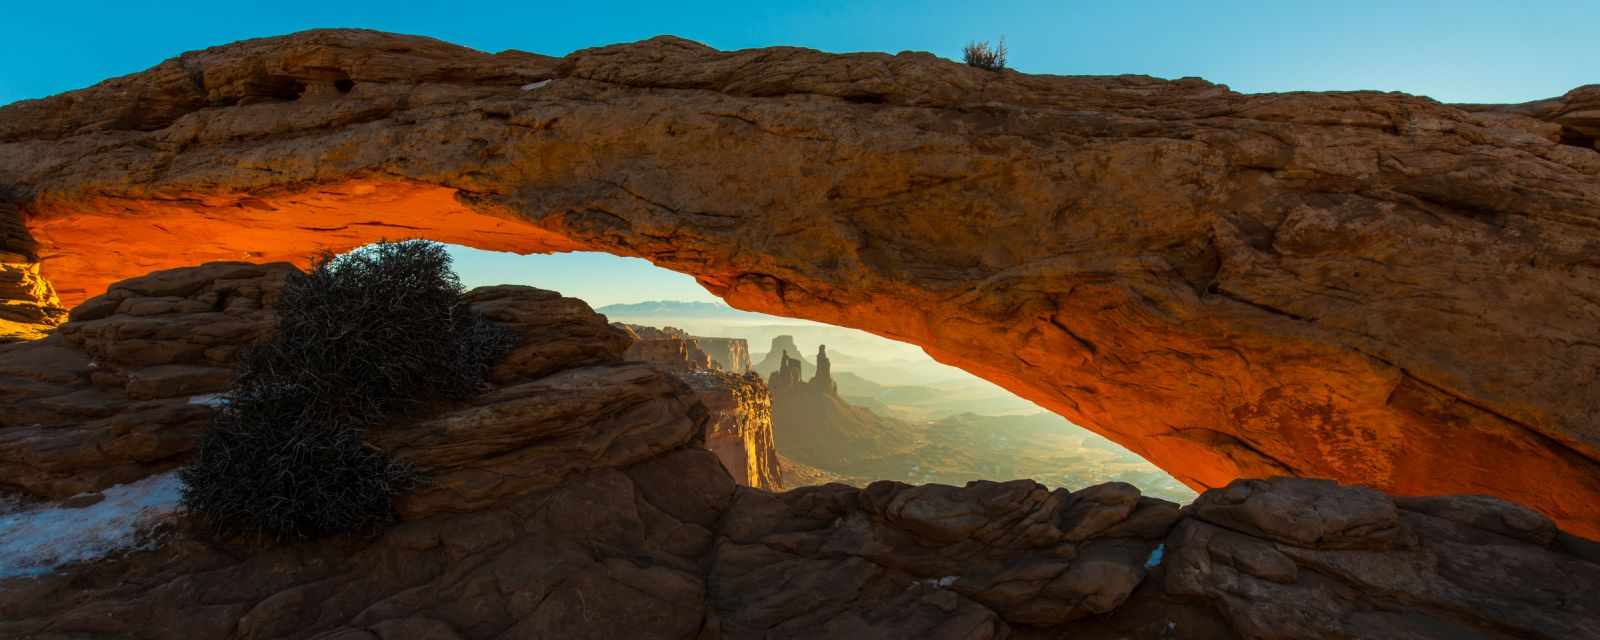 Mesa Arch at Sunrise in the Canyonlands